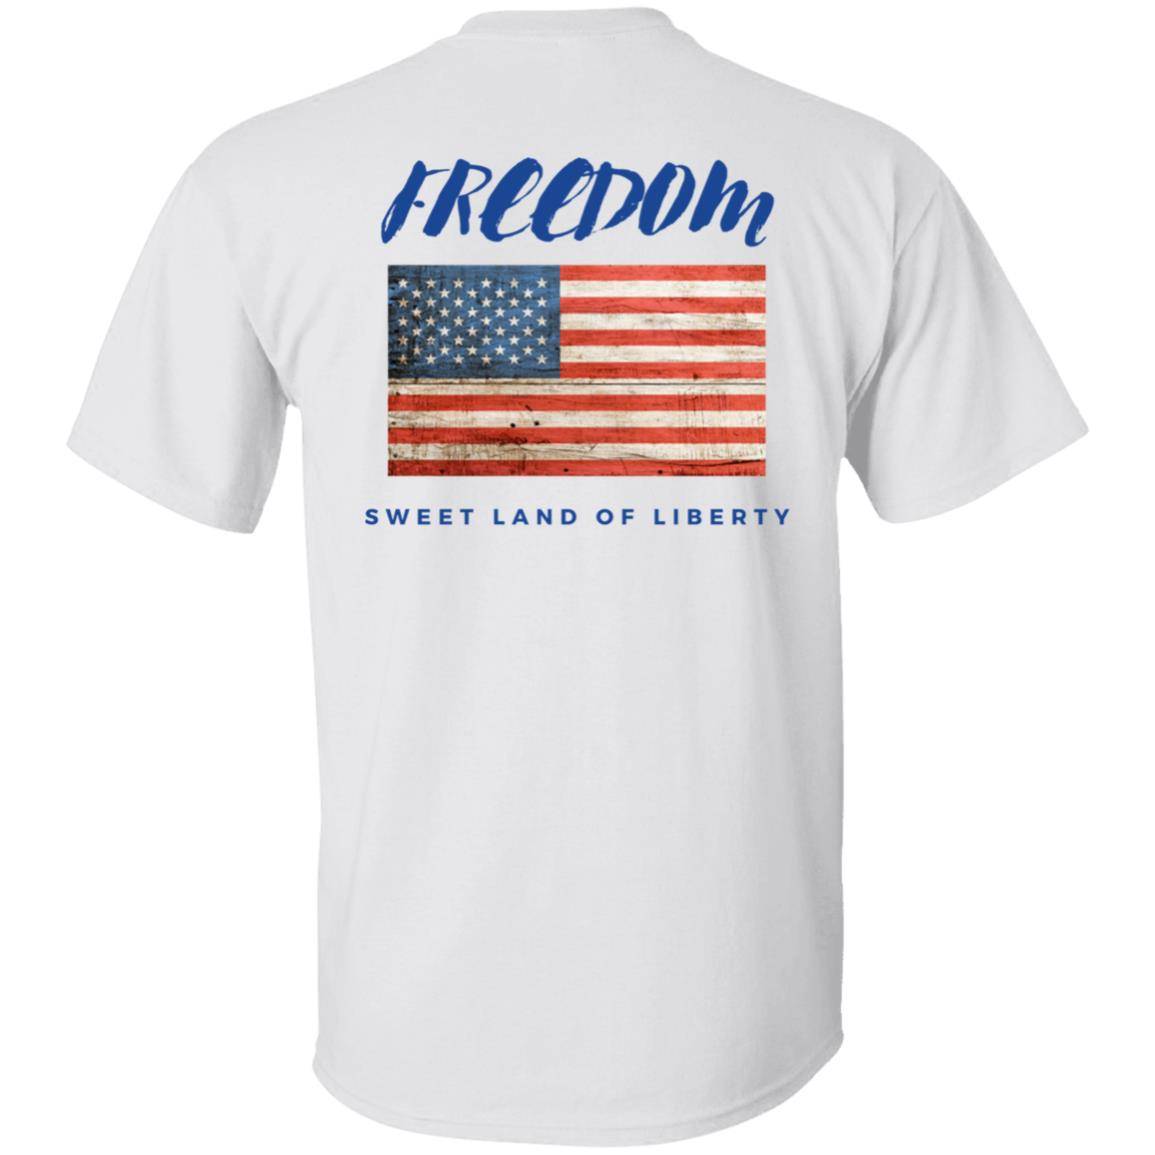 White, heavyweight classic unisex t-shirt in 100% cotton. Freedom is written across the chest back with a grunge American flag below it and written beneath that is Sweet Land of Liberty.